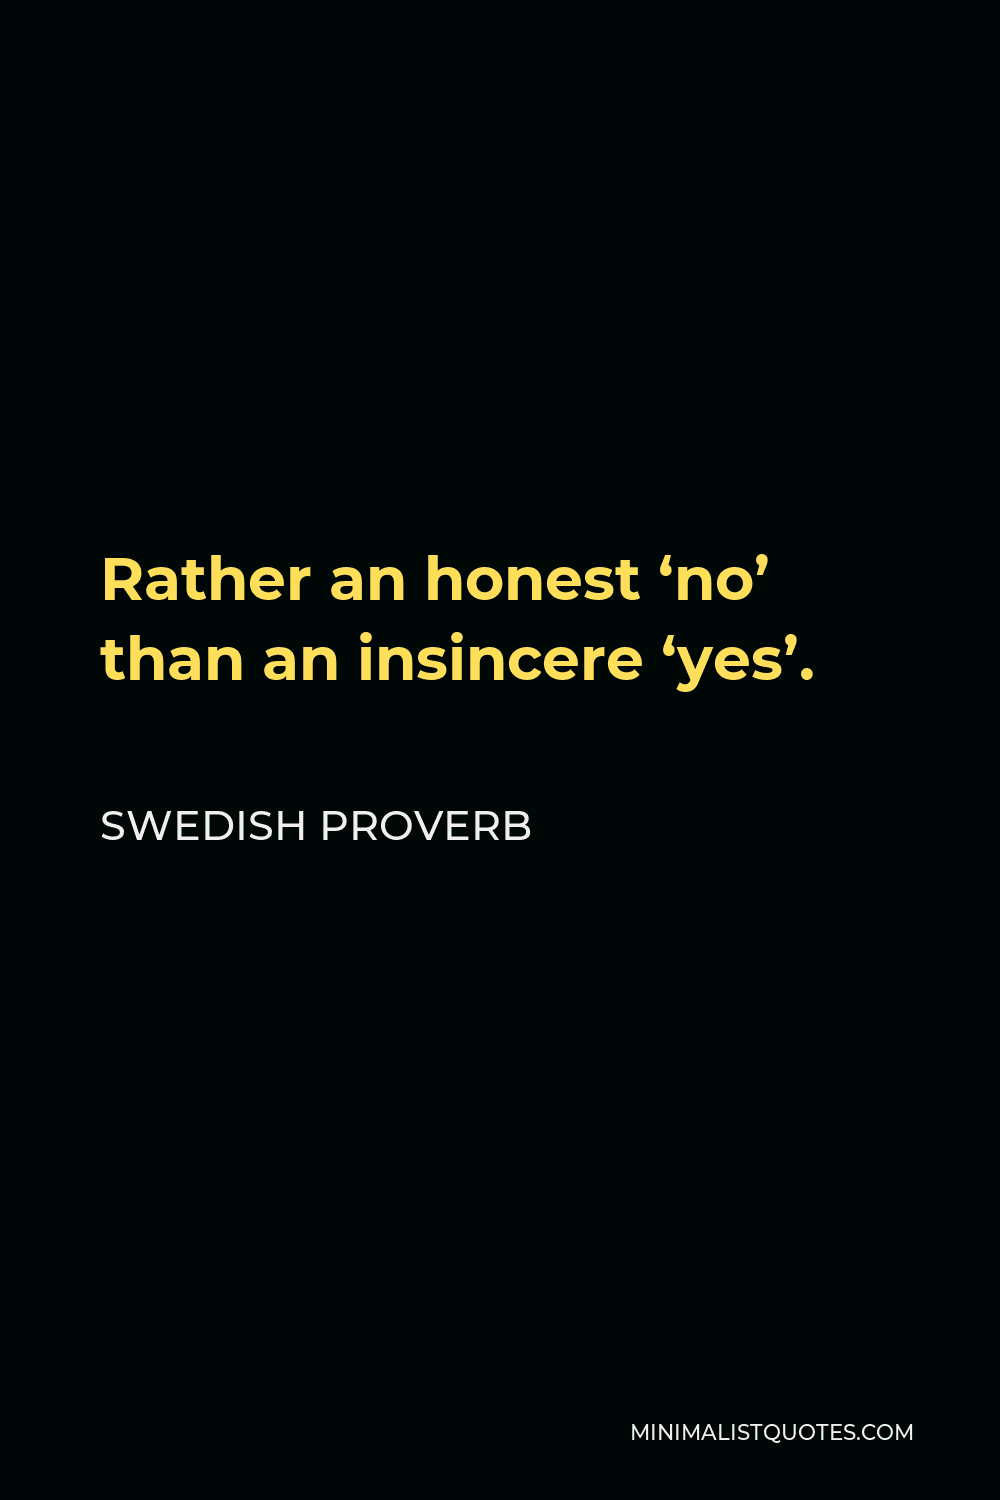 Swedish Proverb Quote - Rather an honest ‘no’ than an insincere ‘yes’.